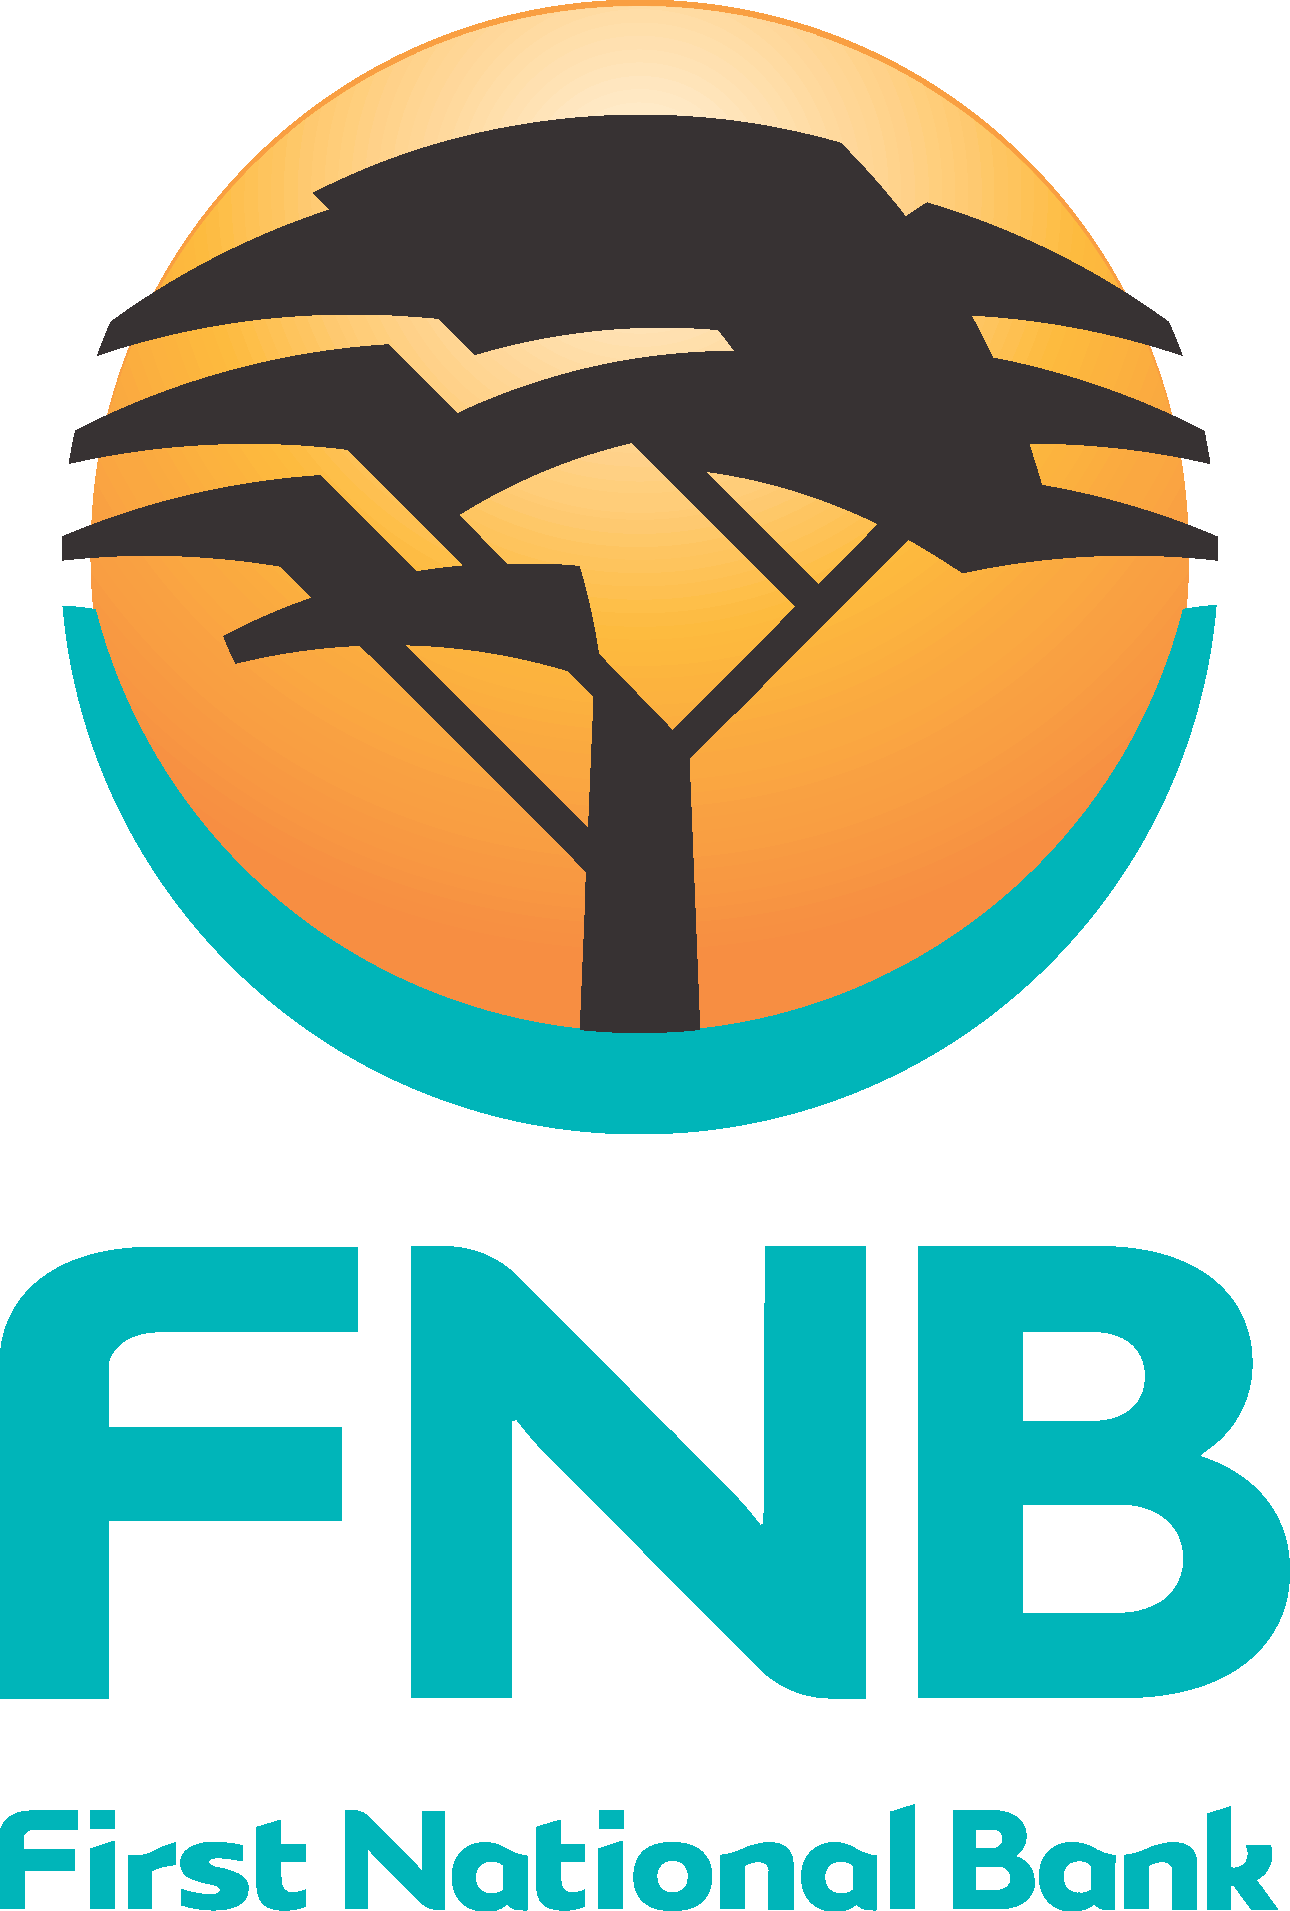 FNB Bank [First National Bank] png